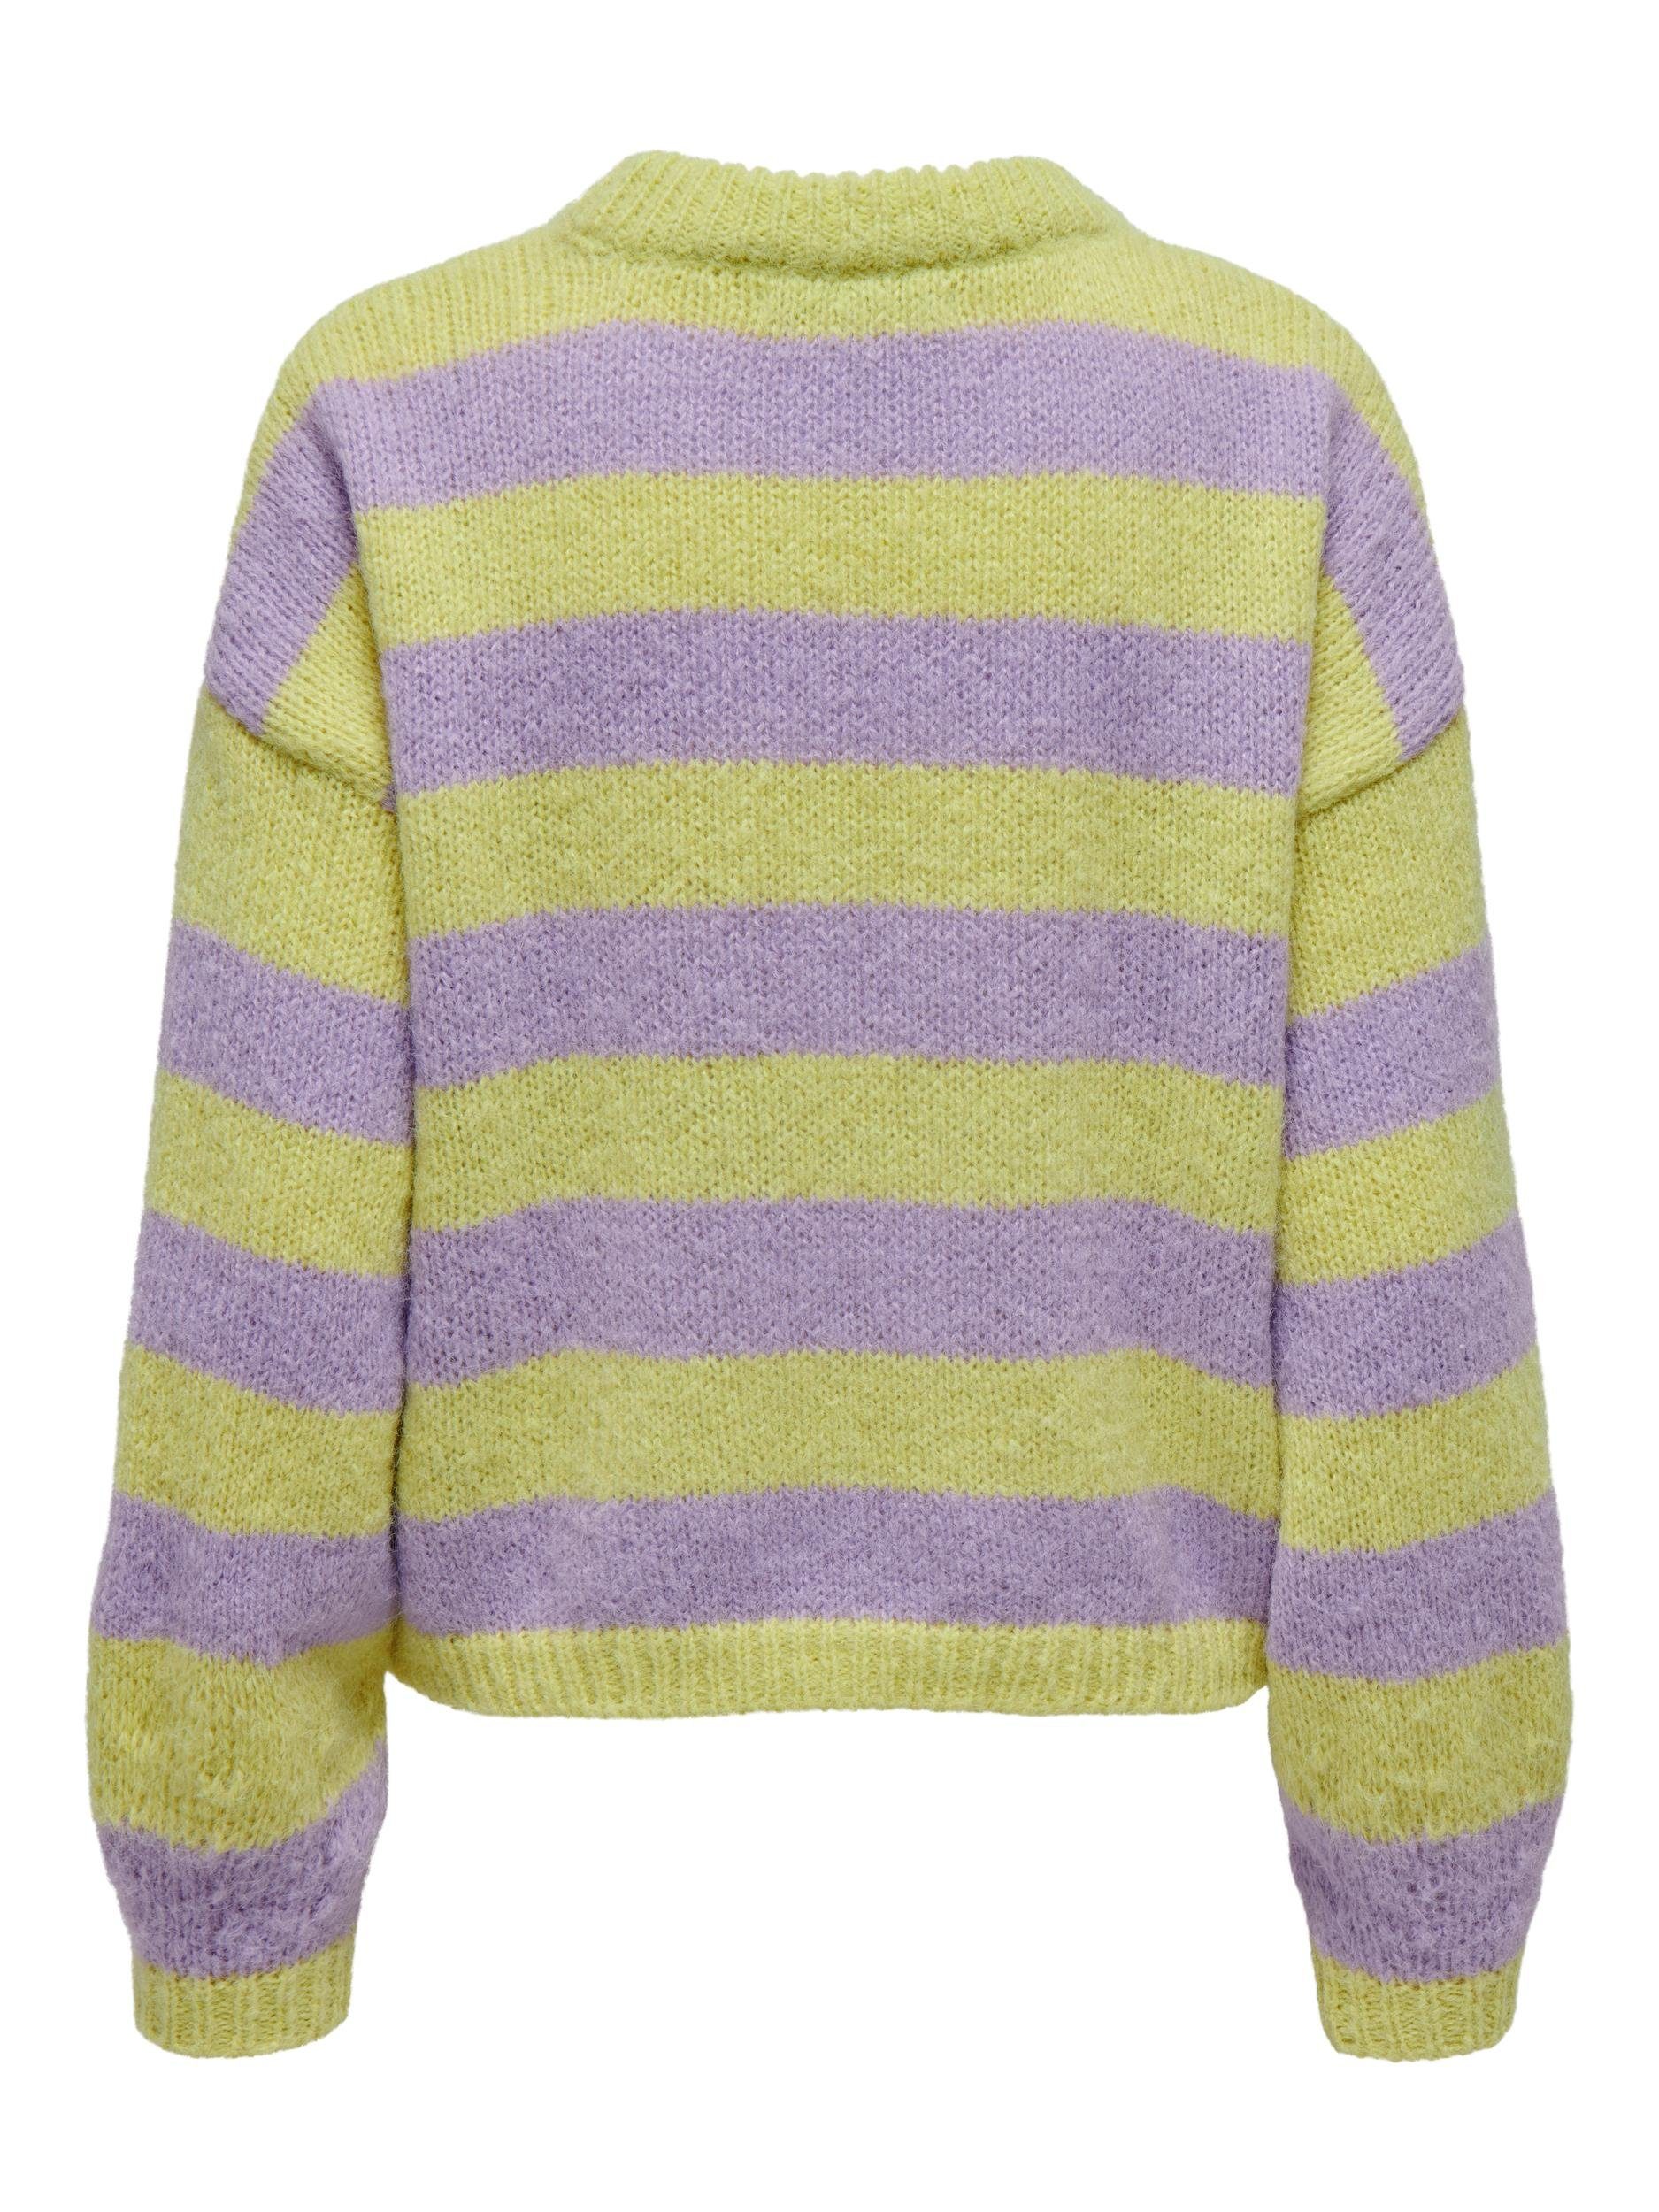 Strickpullover ONECK KNT ONLBUBBLE ONLY LS STRIPE LIFE